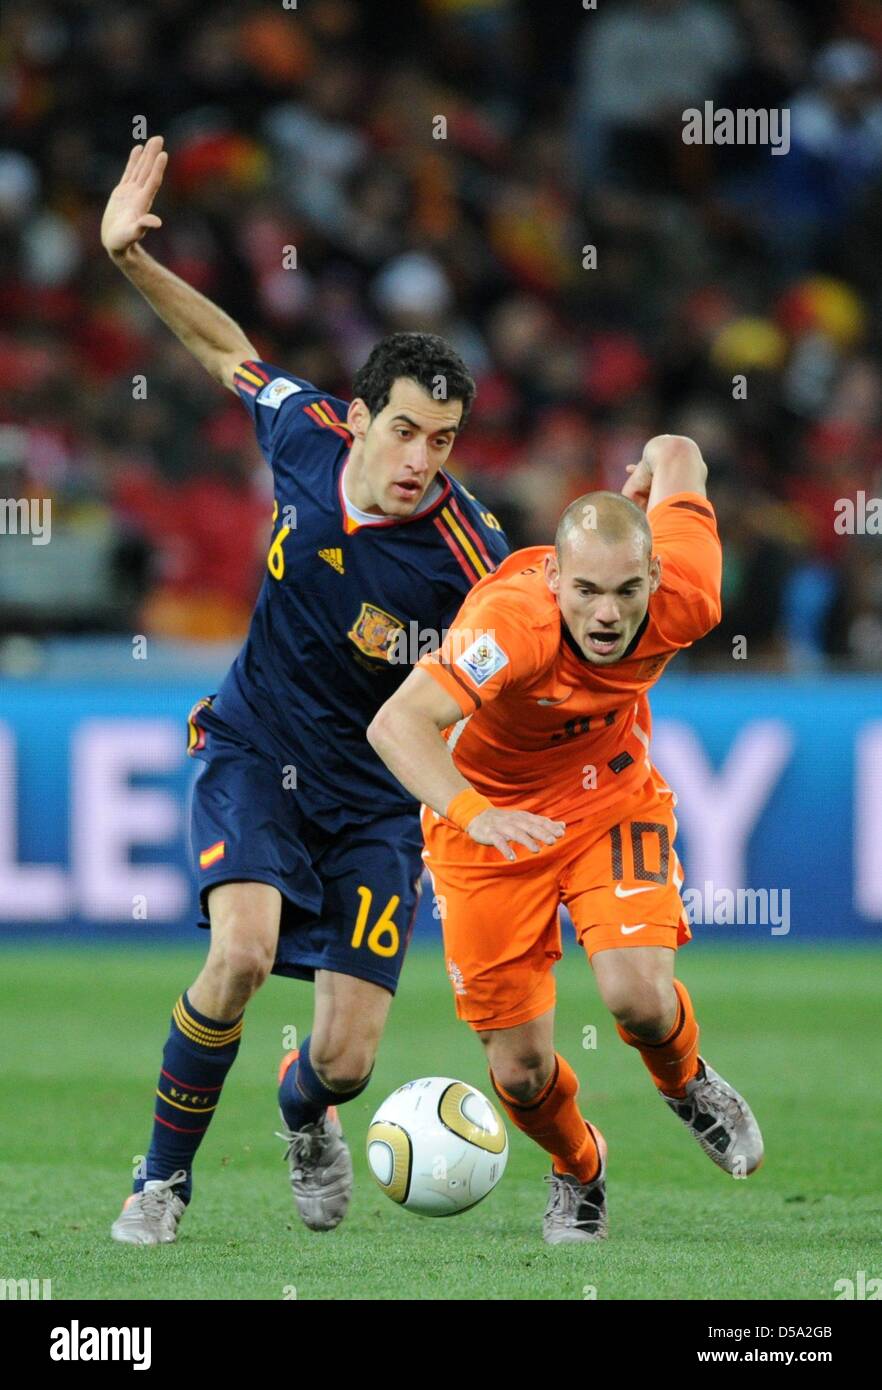 Dutch Wesley Sneijder (R) vies for the ball with Spain's Sergio Busquets during the 2010 FIFA World Cup final match between the Netherlands and Spain at Soccer City Stadium in Johannesburg, South Africa 11 July 2010. Photo: Marcus Brandt dpa - Please refer to http://dpaq.de/FIFA-WM2010-TC Stock Photo